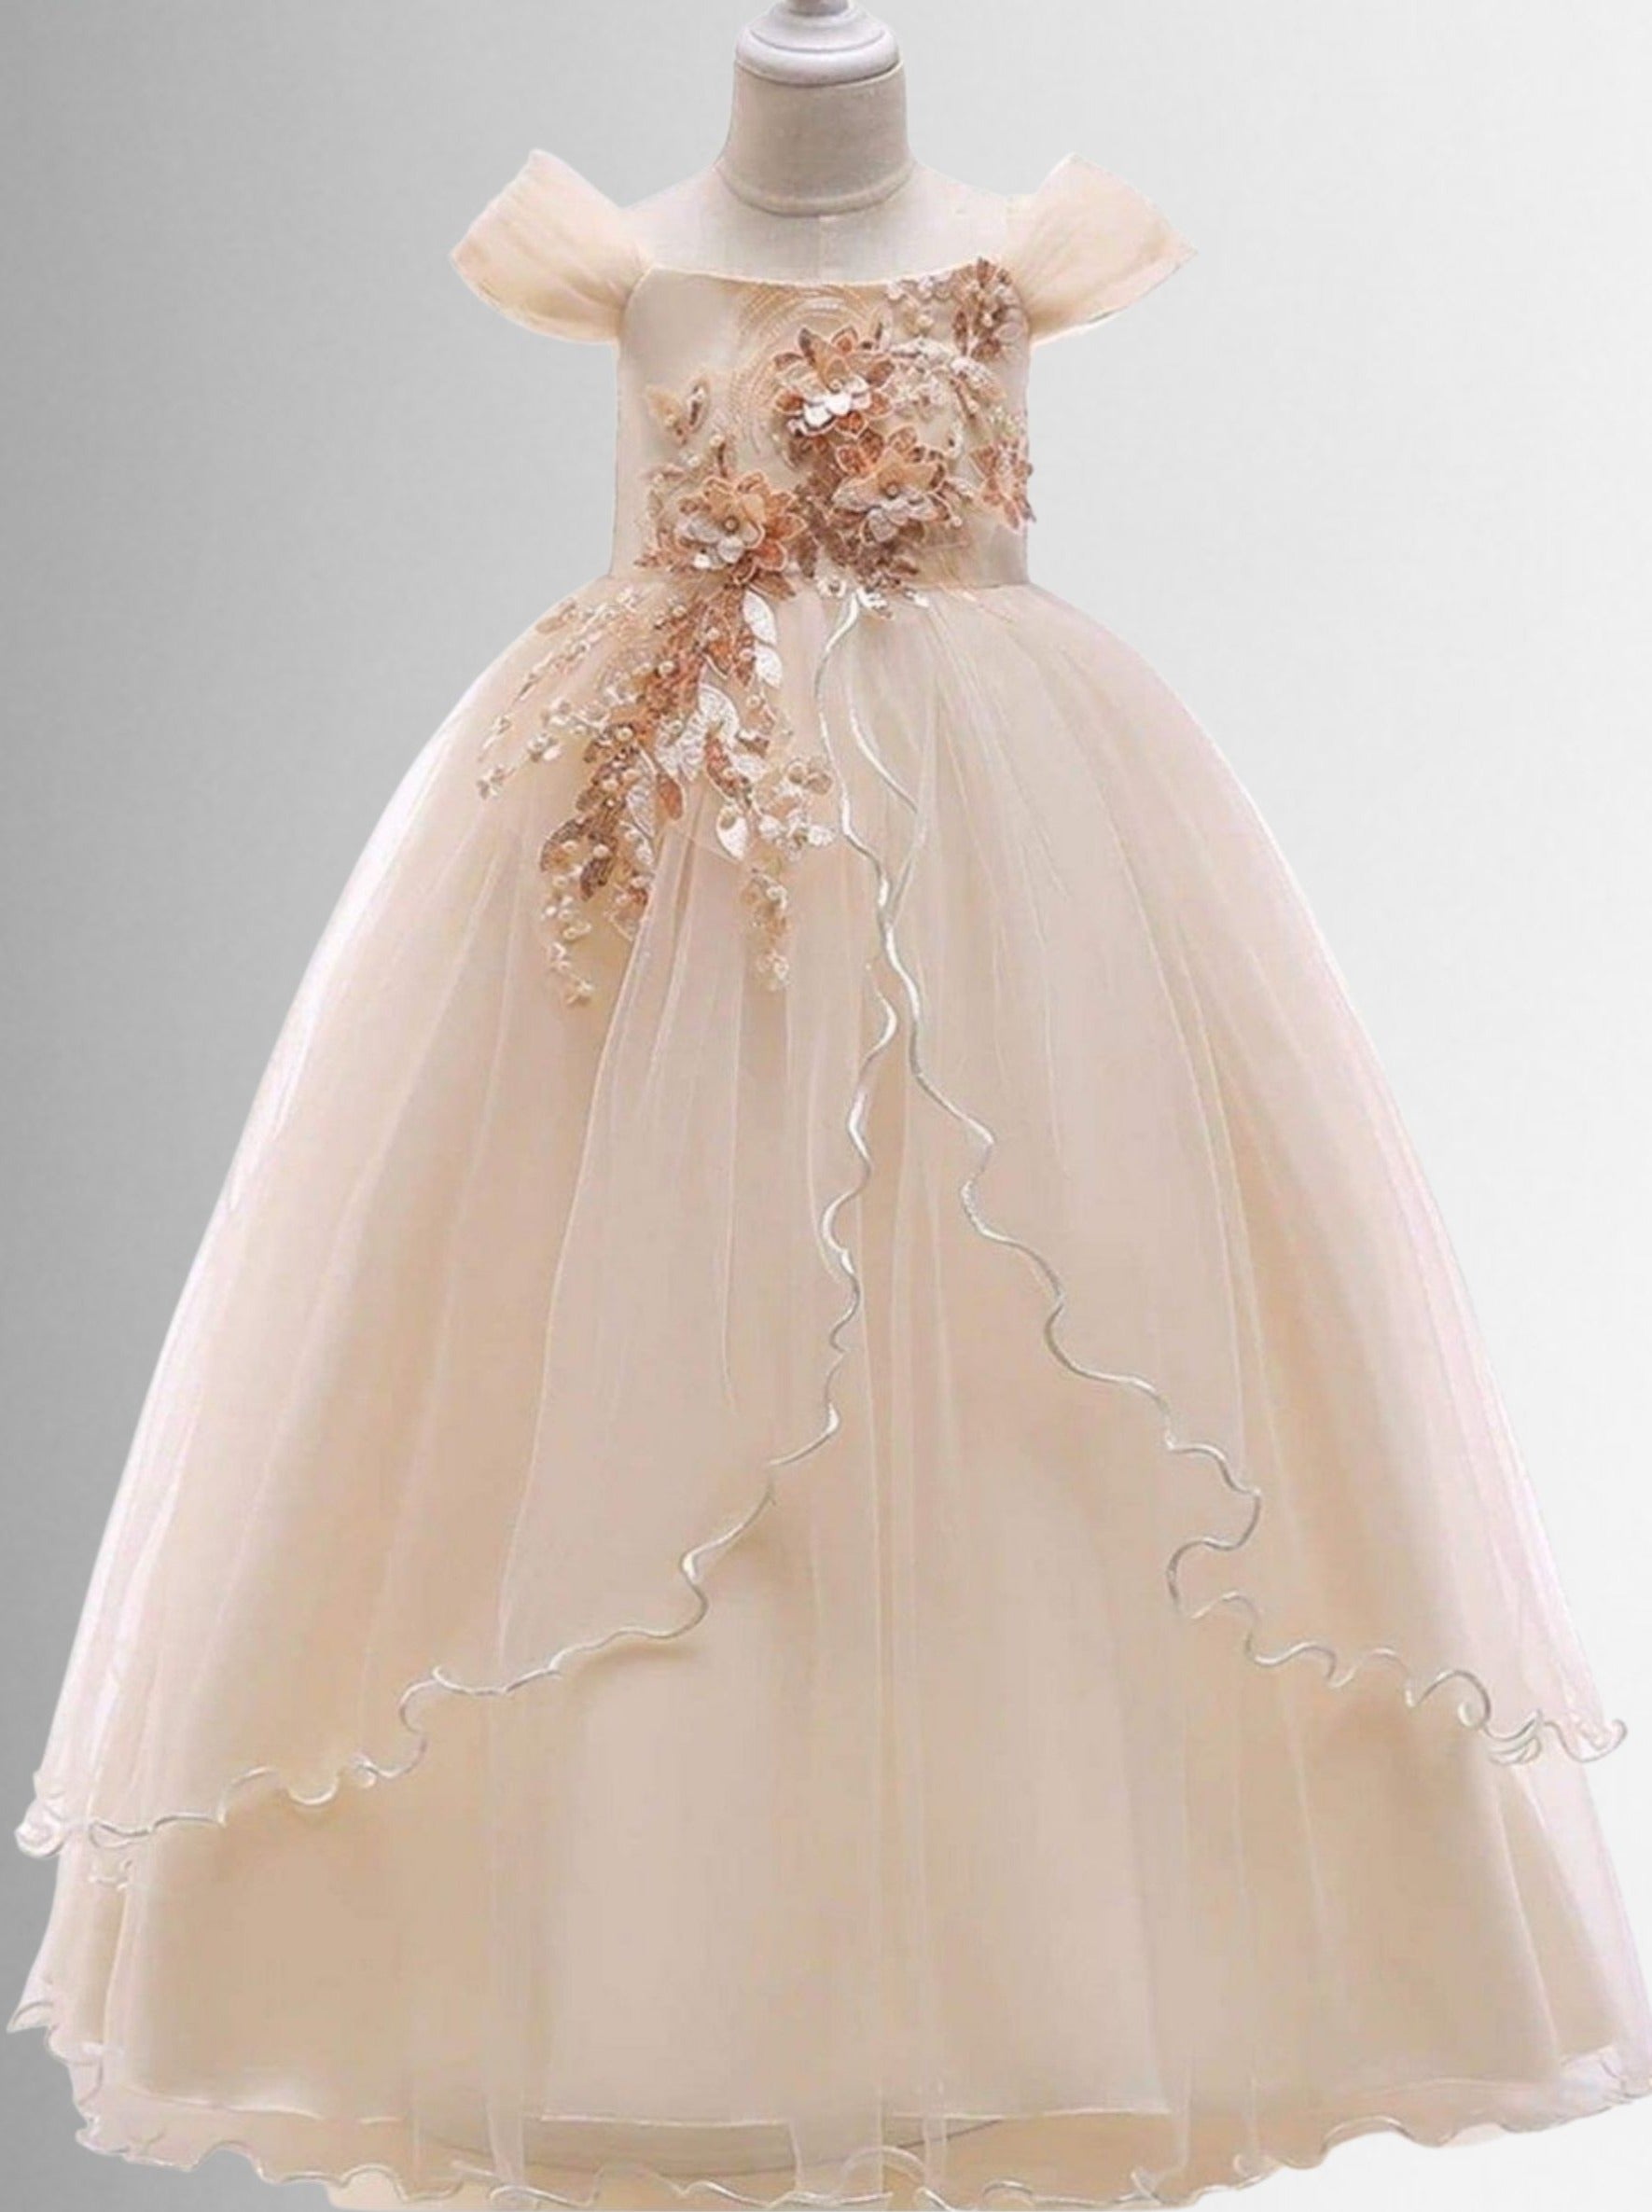 Girls Formal Dresses | Regal Beauty Embellished Princess Gown – Mia ...